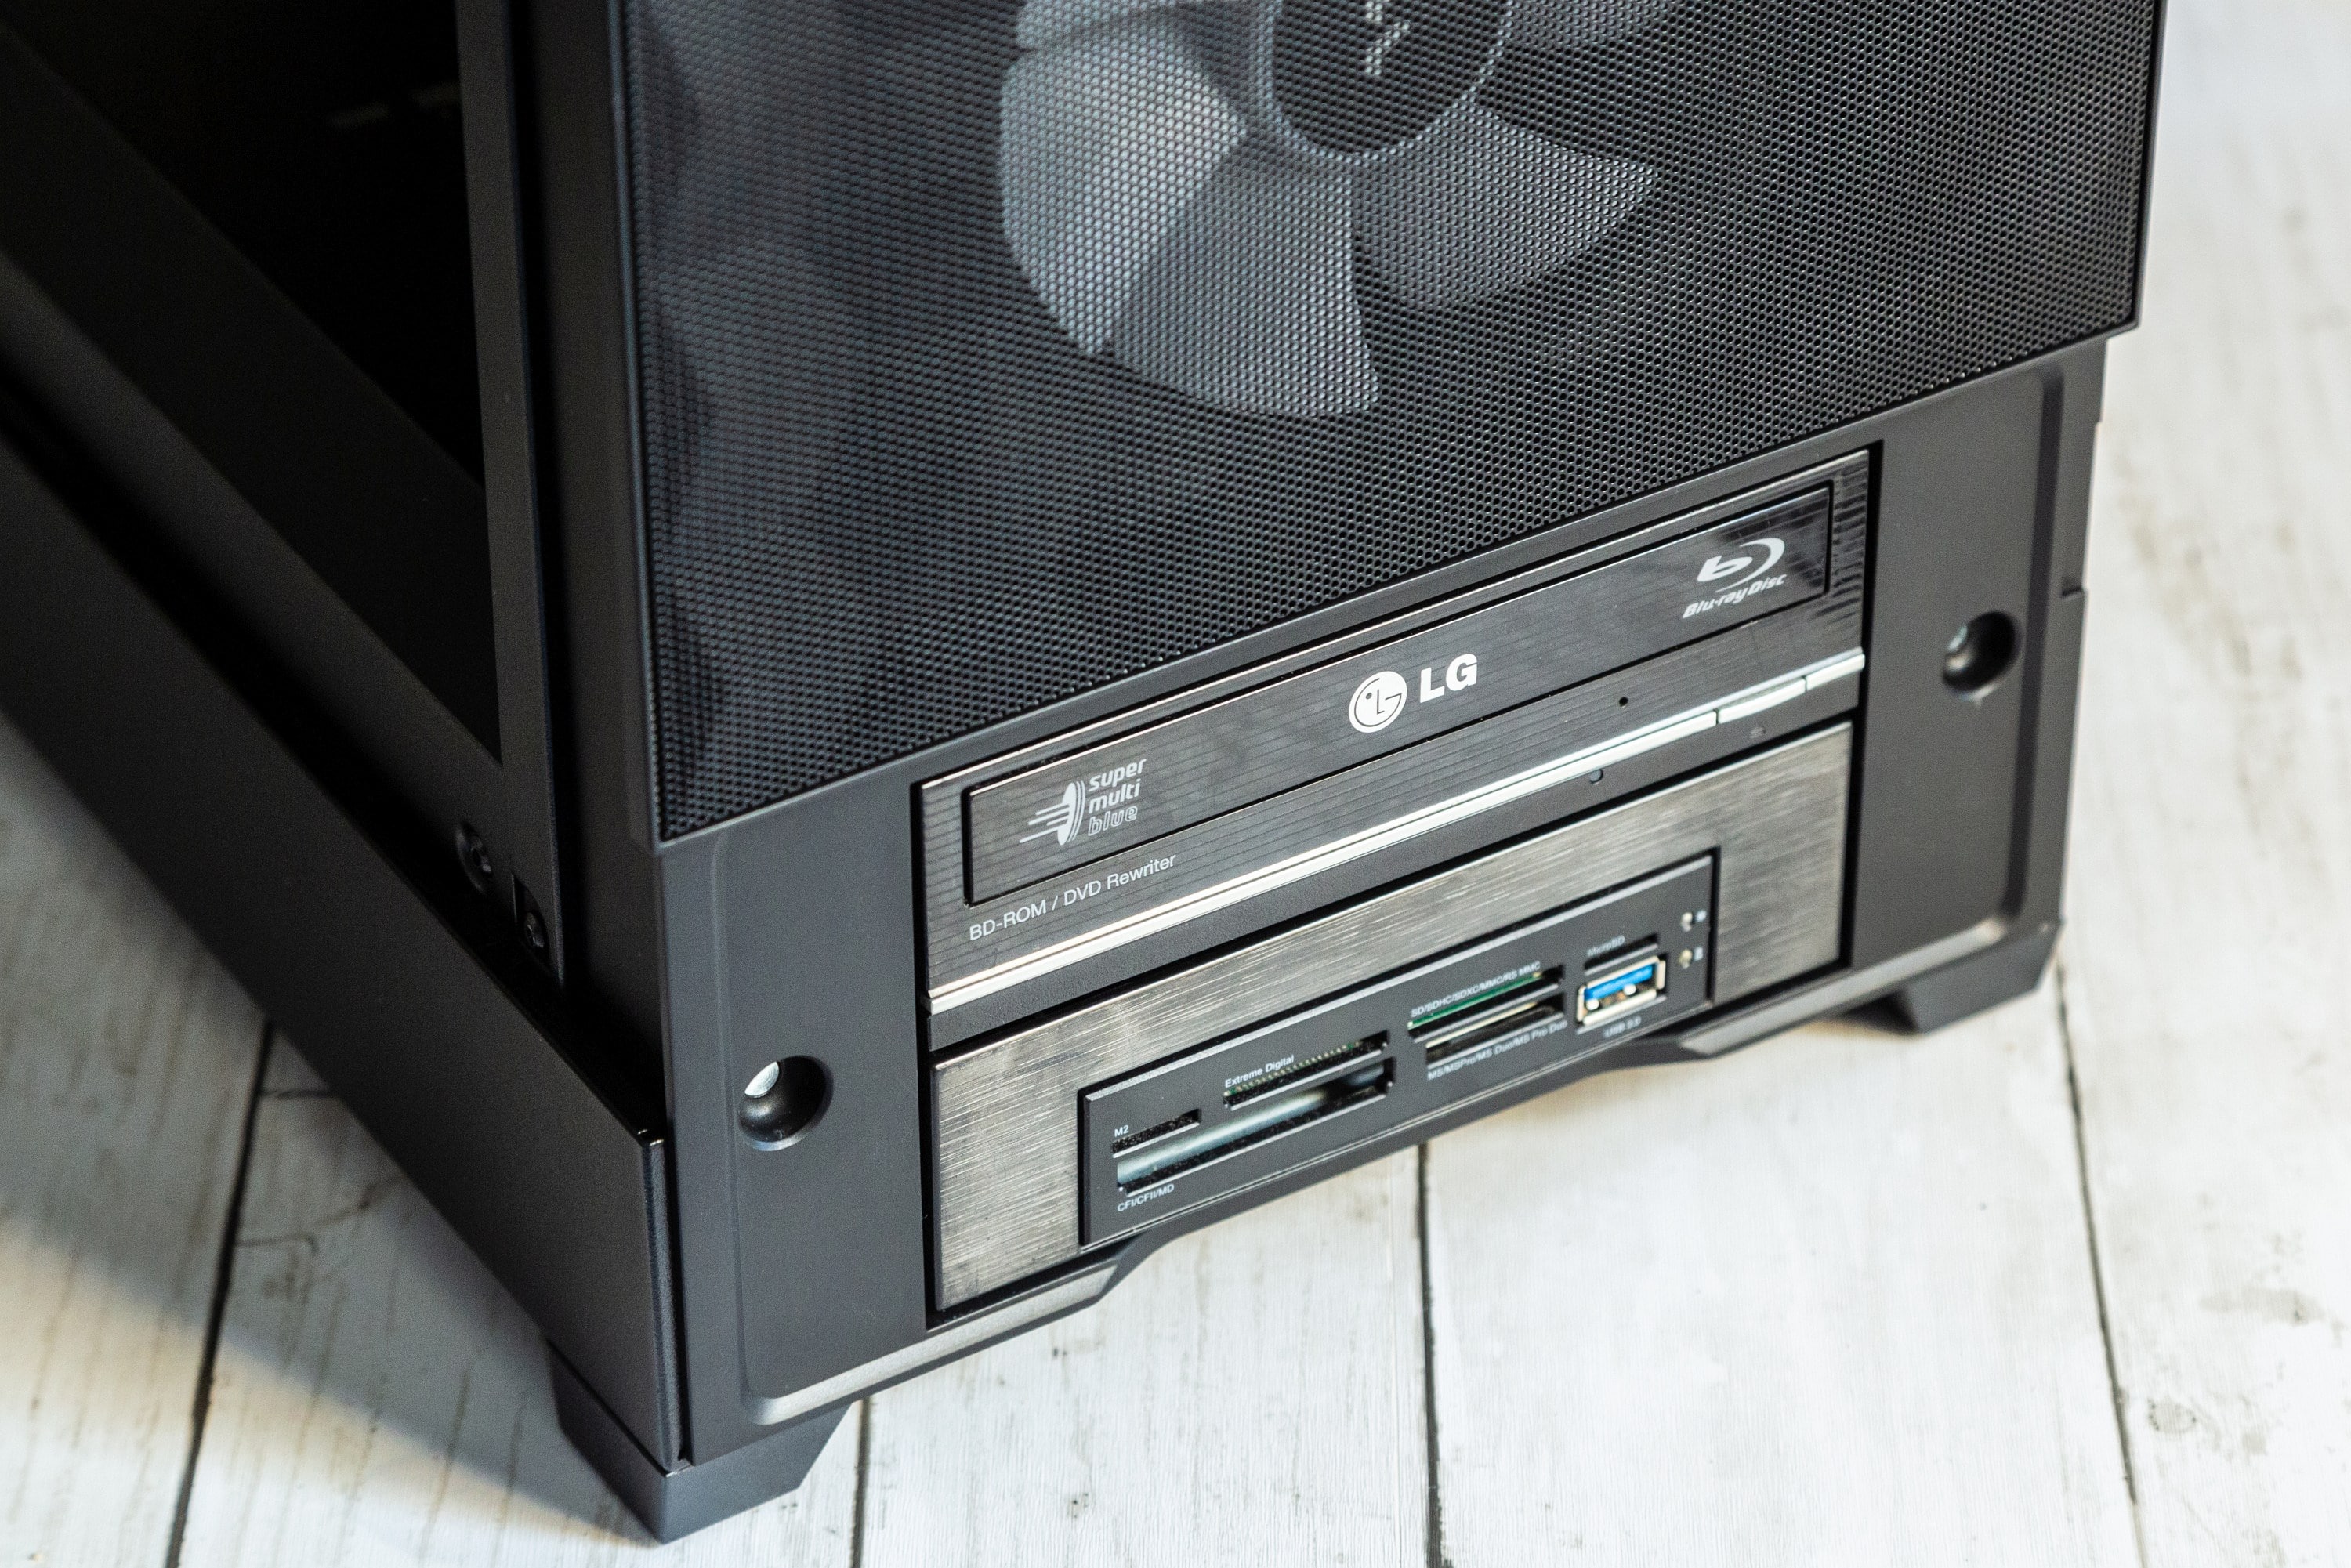 Fractal Design Pop Air Mid-Tower Chassis Review